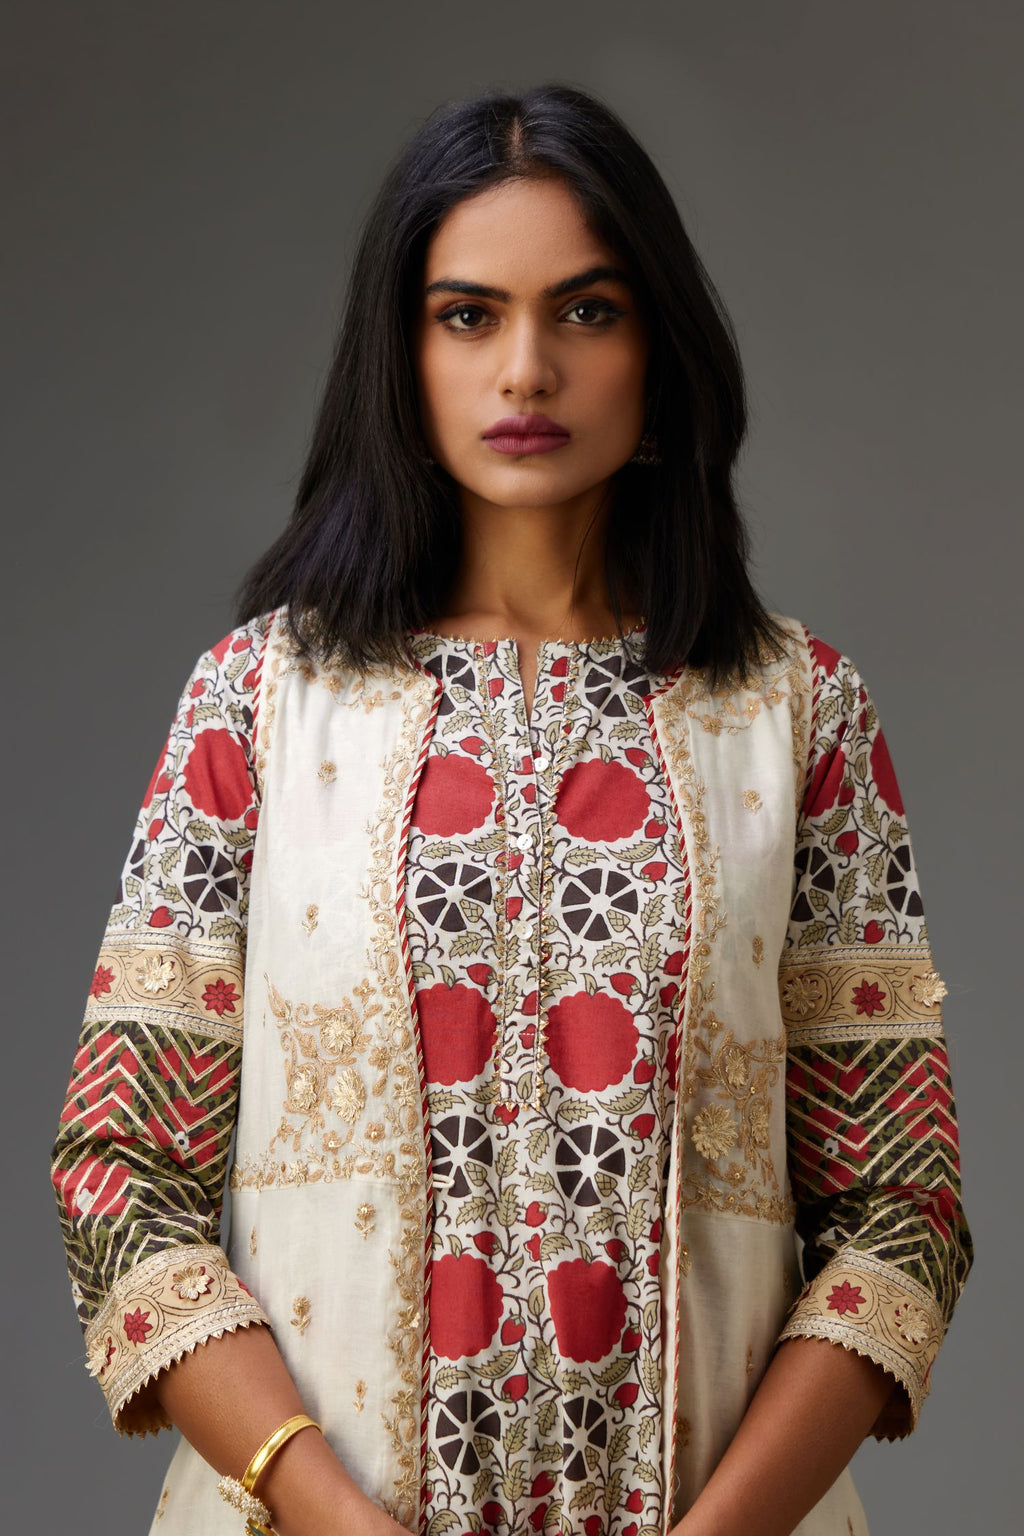 Off white cotton chanderi front open sleeveless jacket set with dori and gota embroidery detailing, highlighted with gold sequin work.